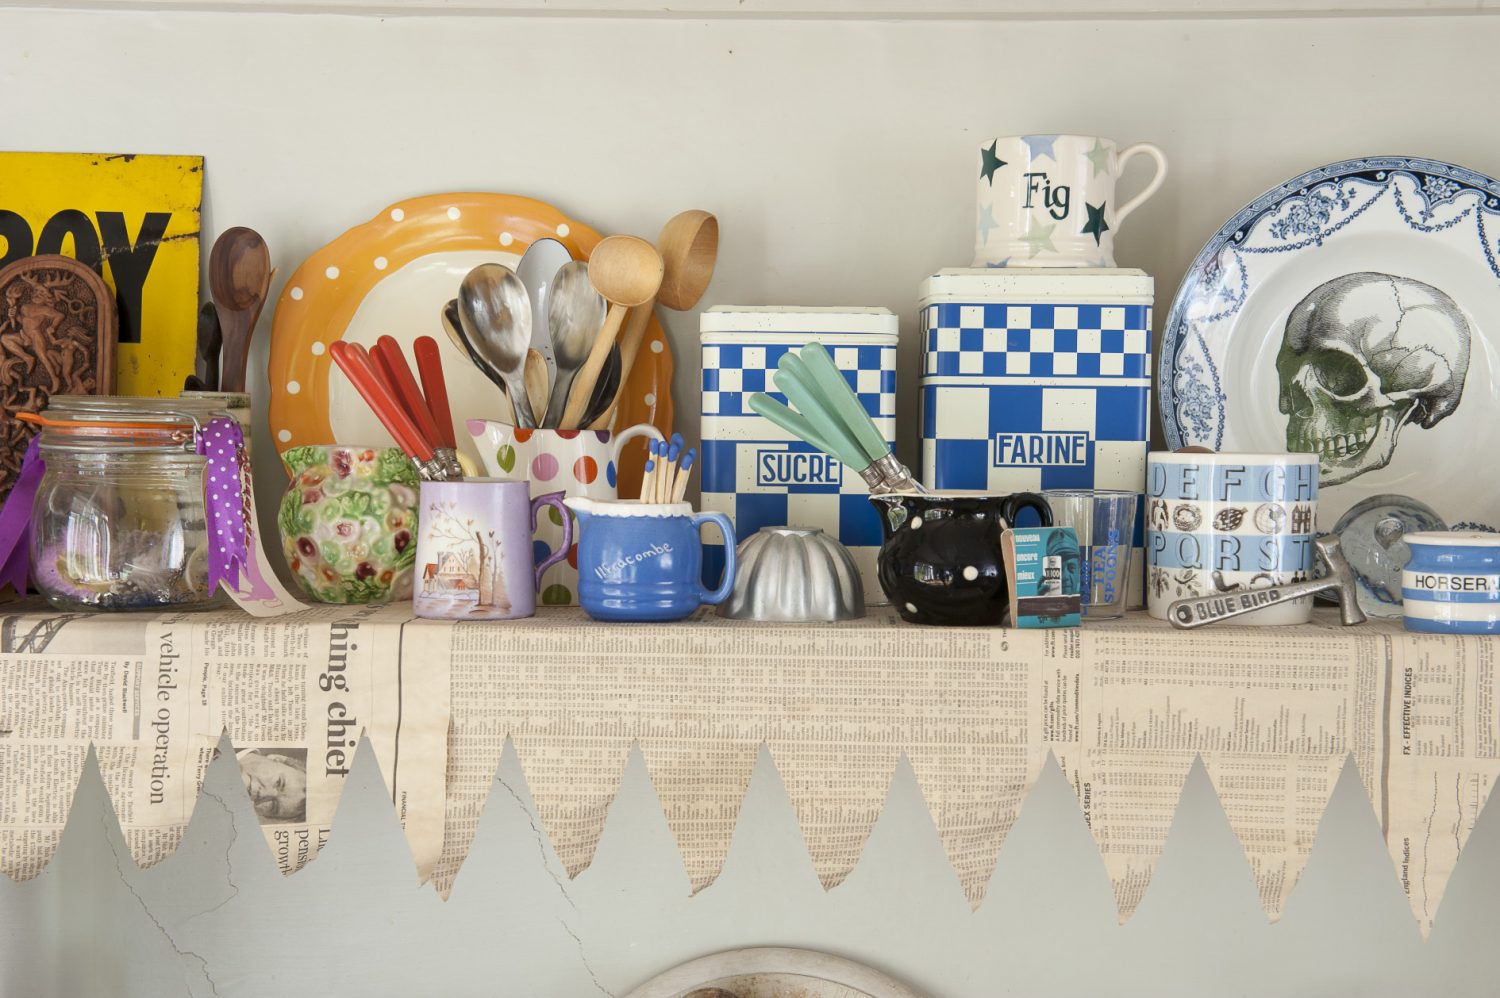 Above the old-fashioned, porcelain sink, shelves that support a collection of Cornish creamware have been lined with newspaper with a precisely cut zigzag edge, so that it looks like bunting